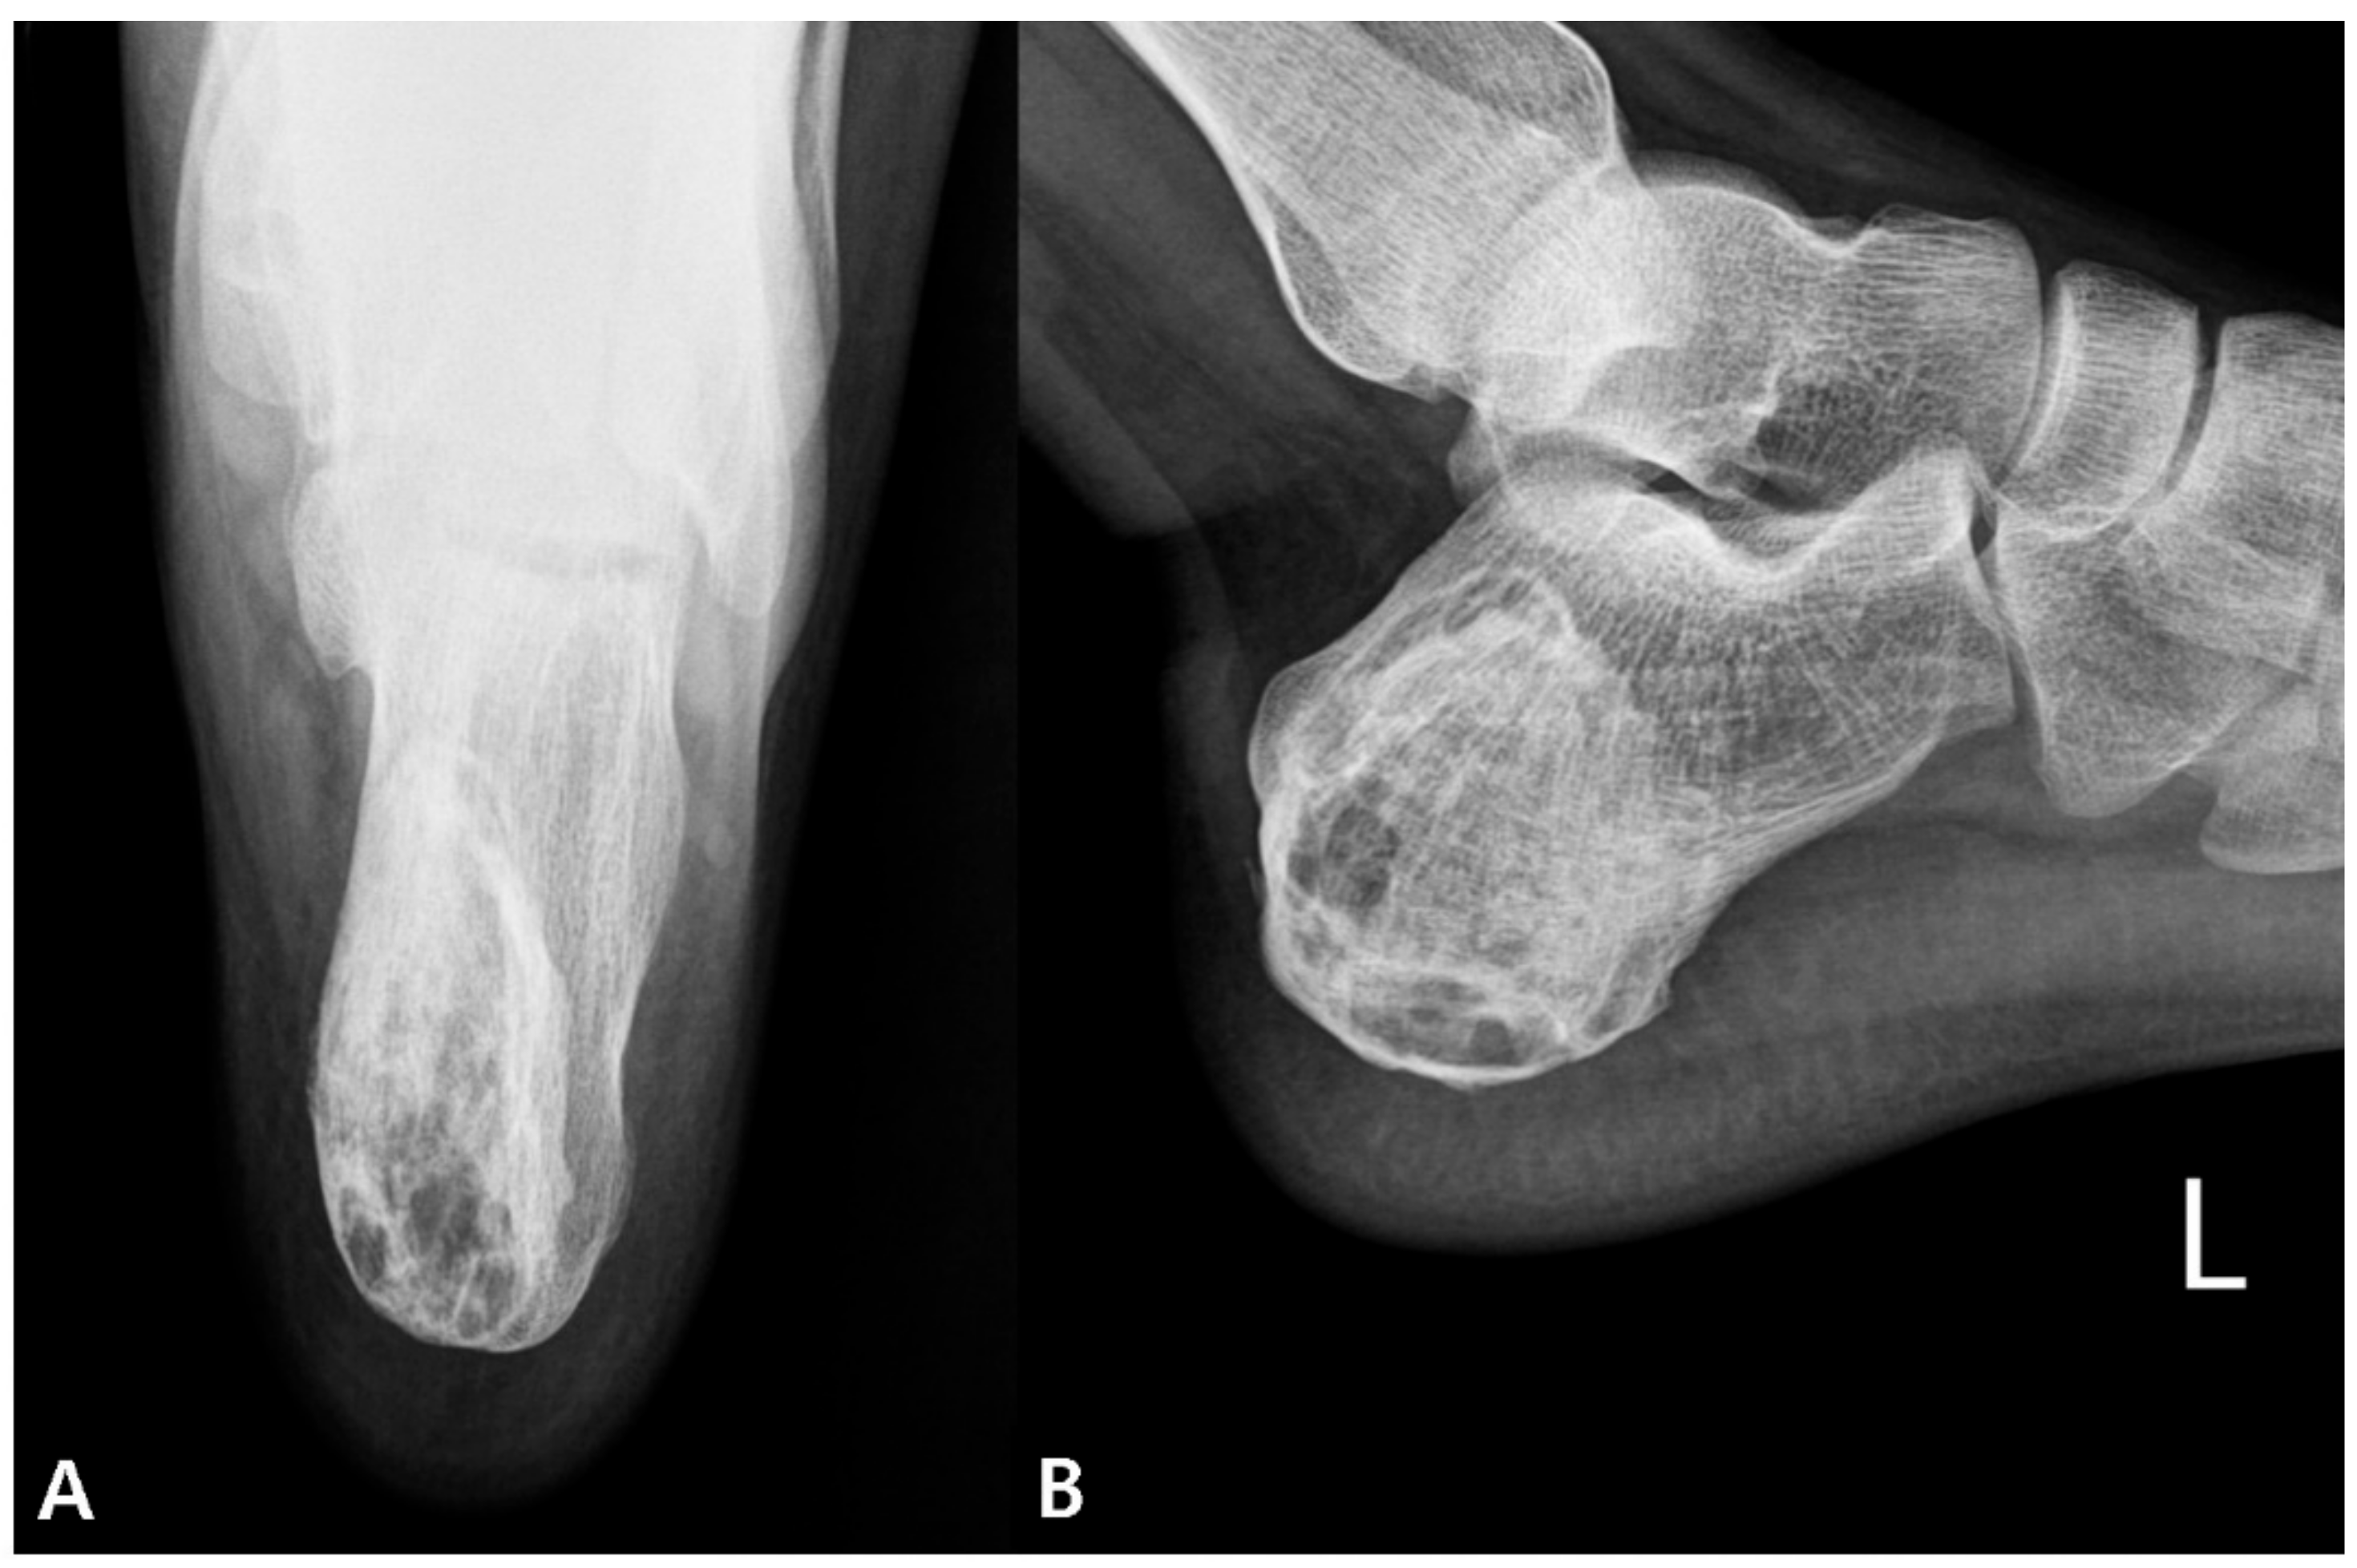 An Unrecognized Foreign Body Retained in the Calcaneus: A Case Report